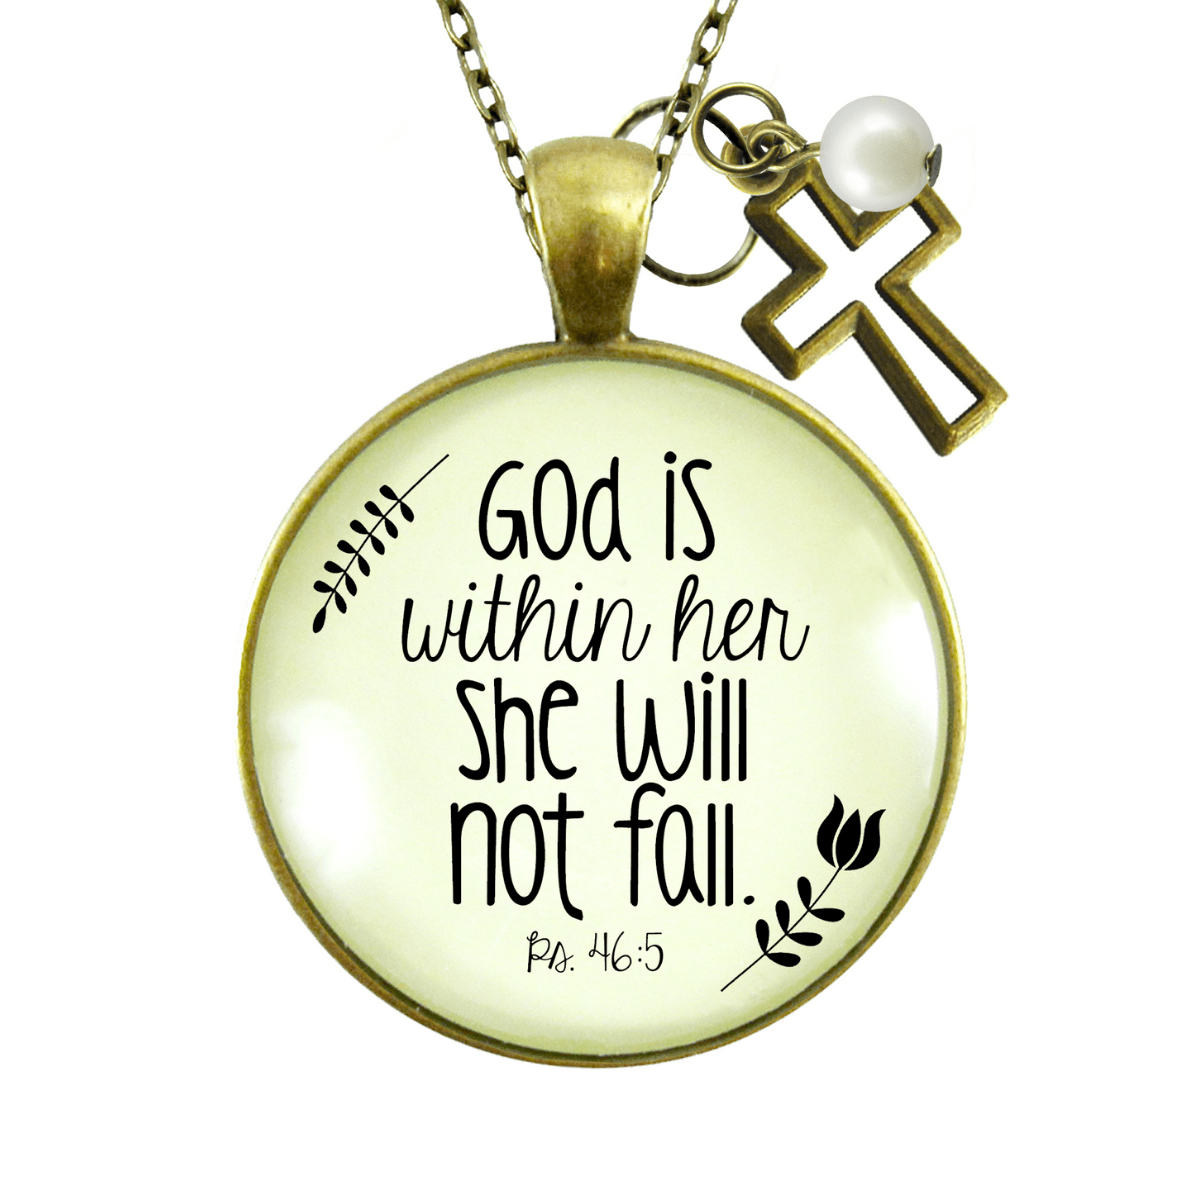 Gutsy Goodness Faith Necklace God is Within Her Psalm Quote Saying Womens Reminder Jewelry - Gutsy Goodness;Faith Necklace God Is Within Her Psalm Quote Saying Womens Reminder Jewelry - Gutsy Goodness Handmade Jewelry Gifts